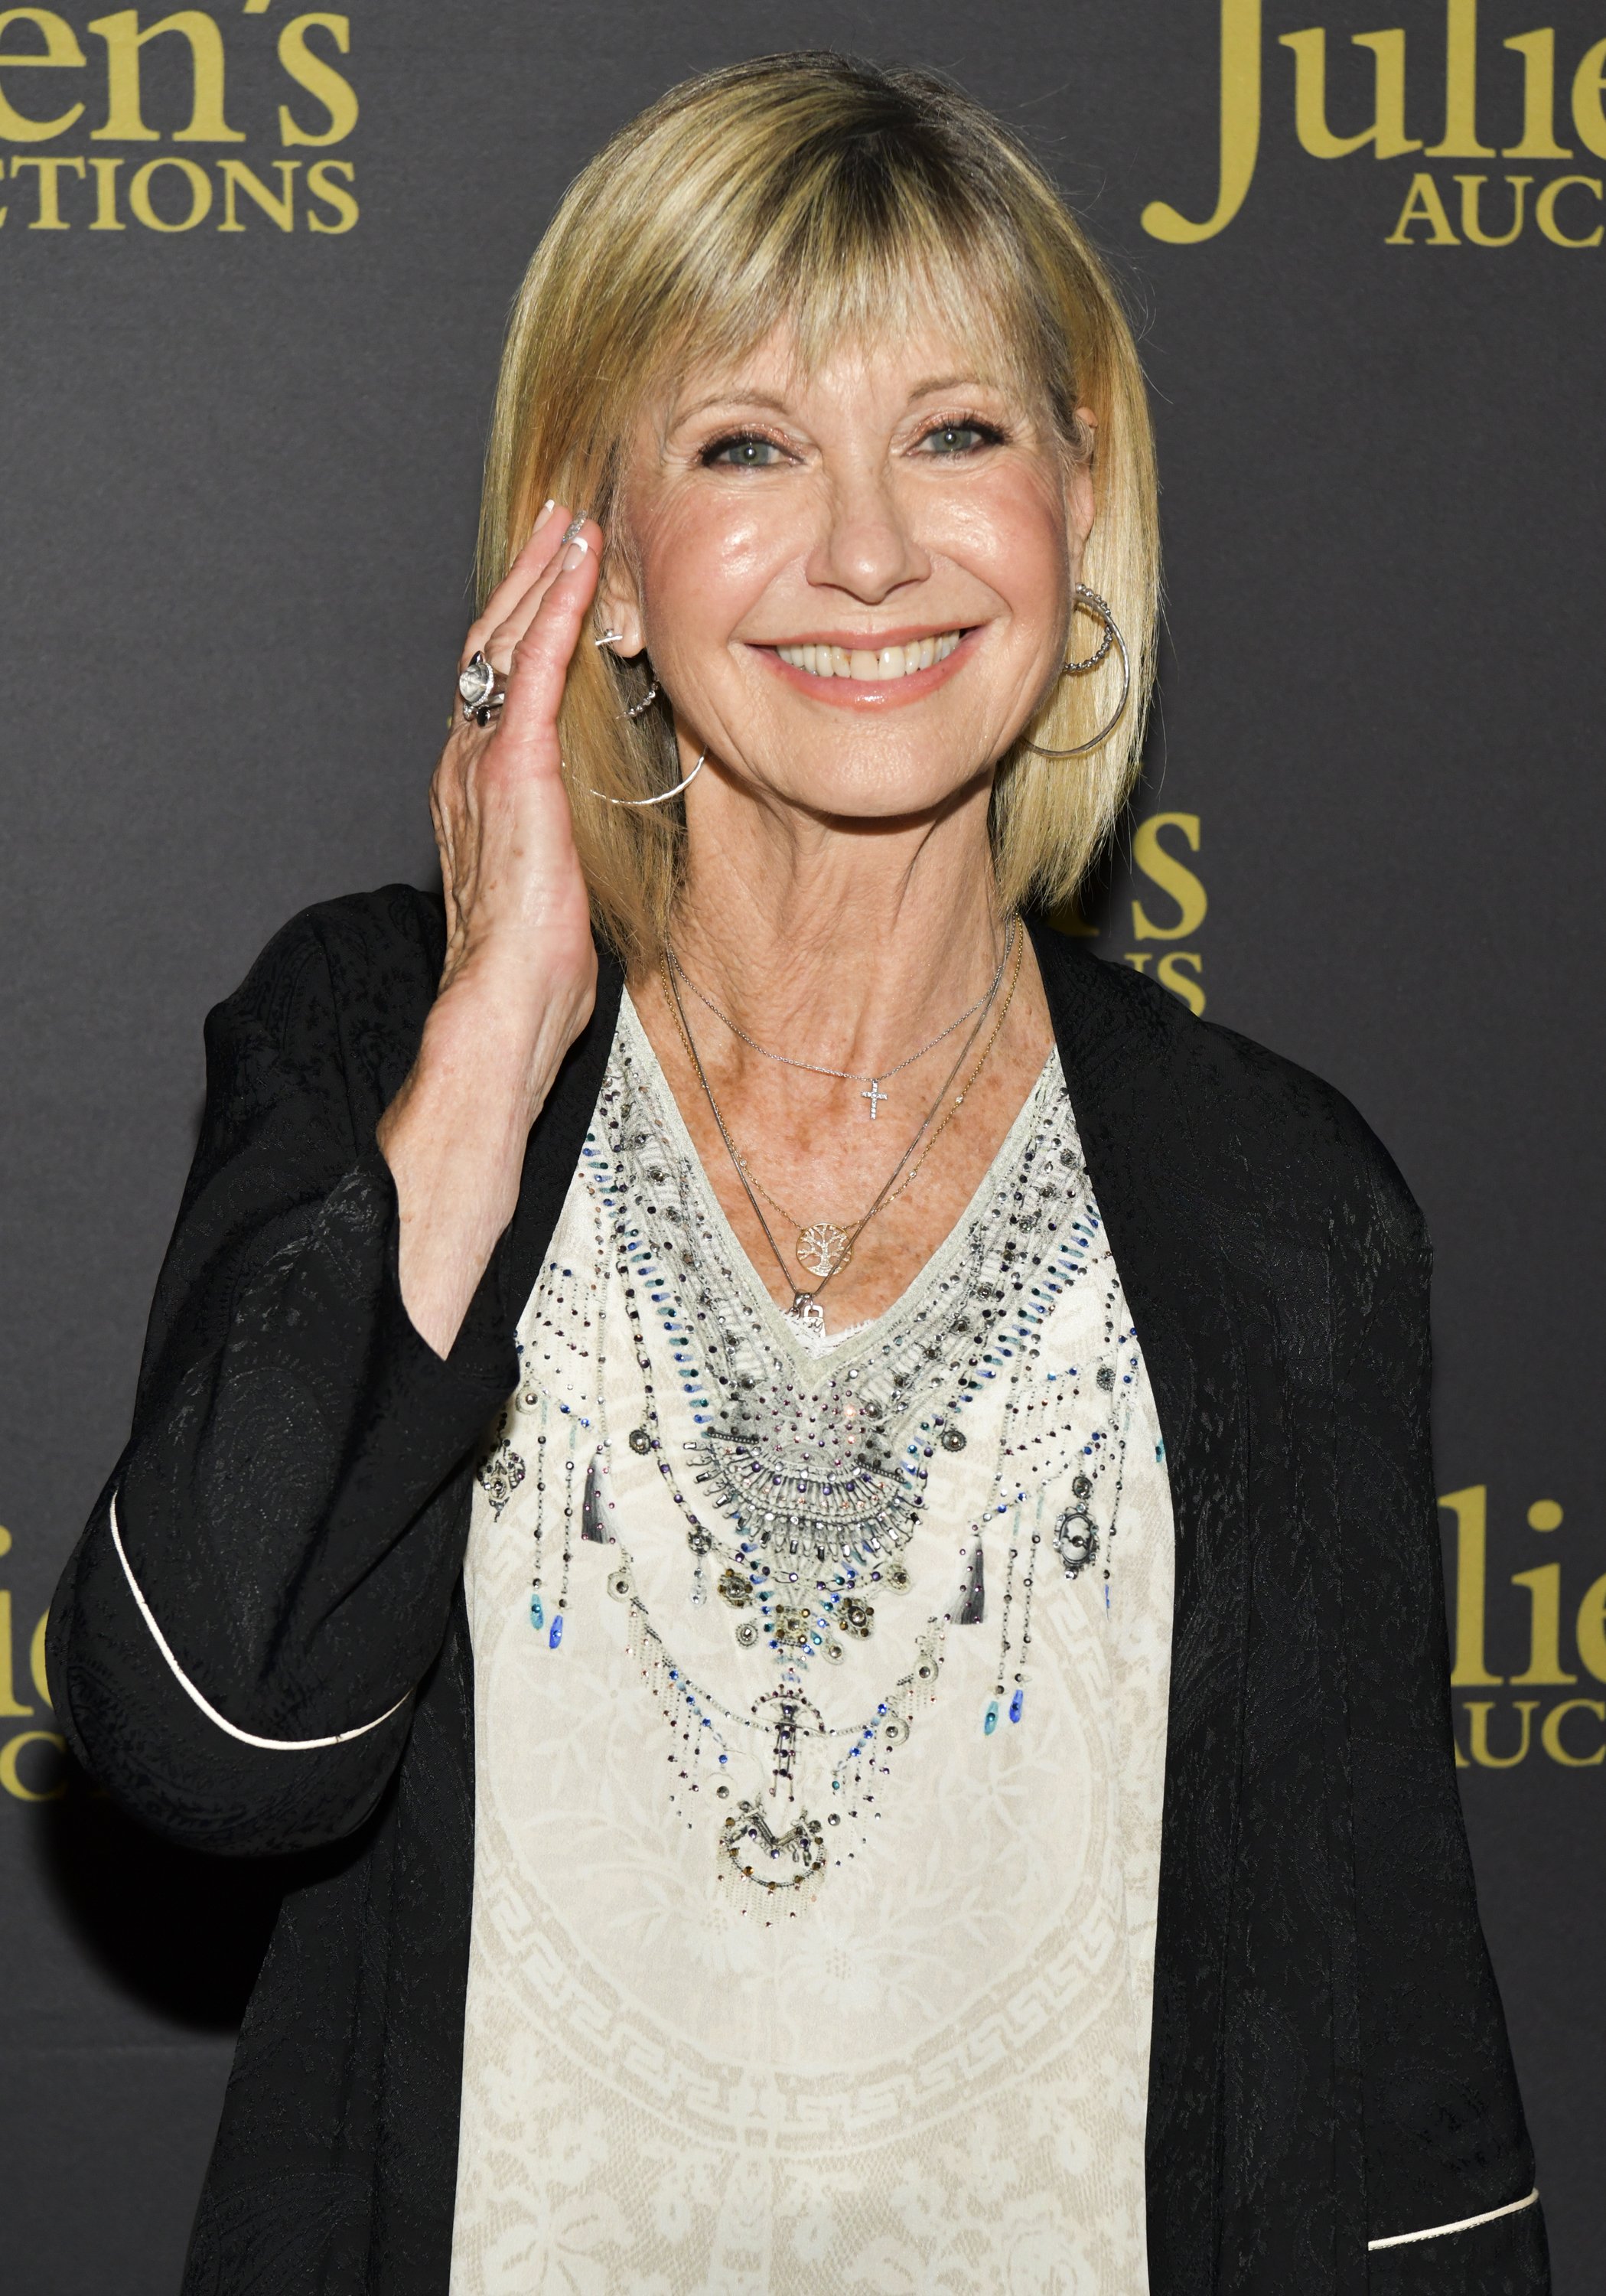 Olivia Newton-John attends the VIP reception for the upcoming "Property of Olivia Newton-John Auction Event at Julien’s Auctions on October 29, 2019, in Beverly Hills, California. | Source: Getty Images